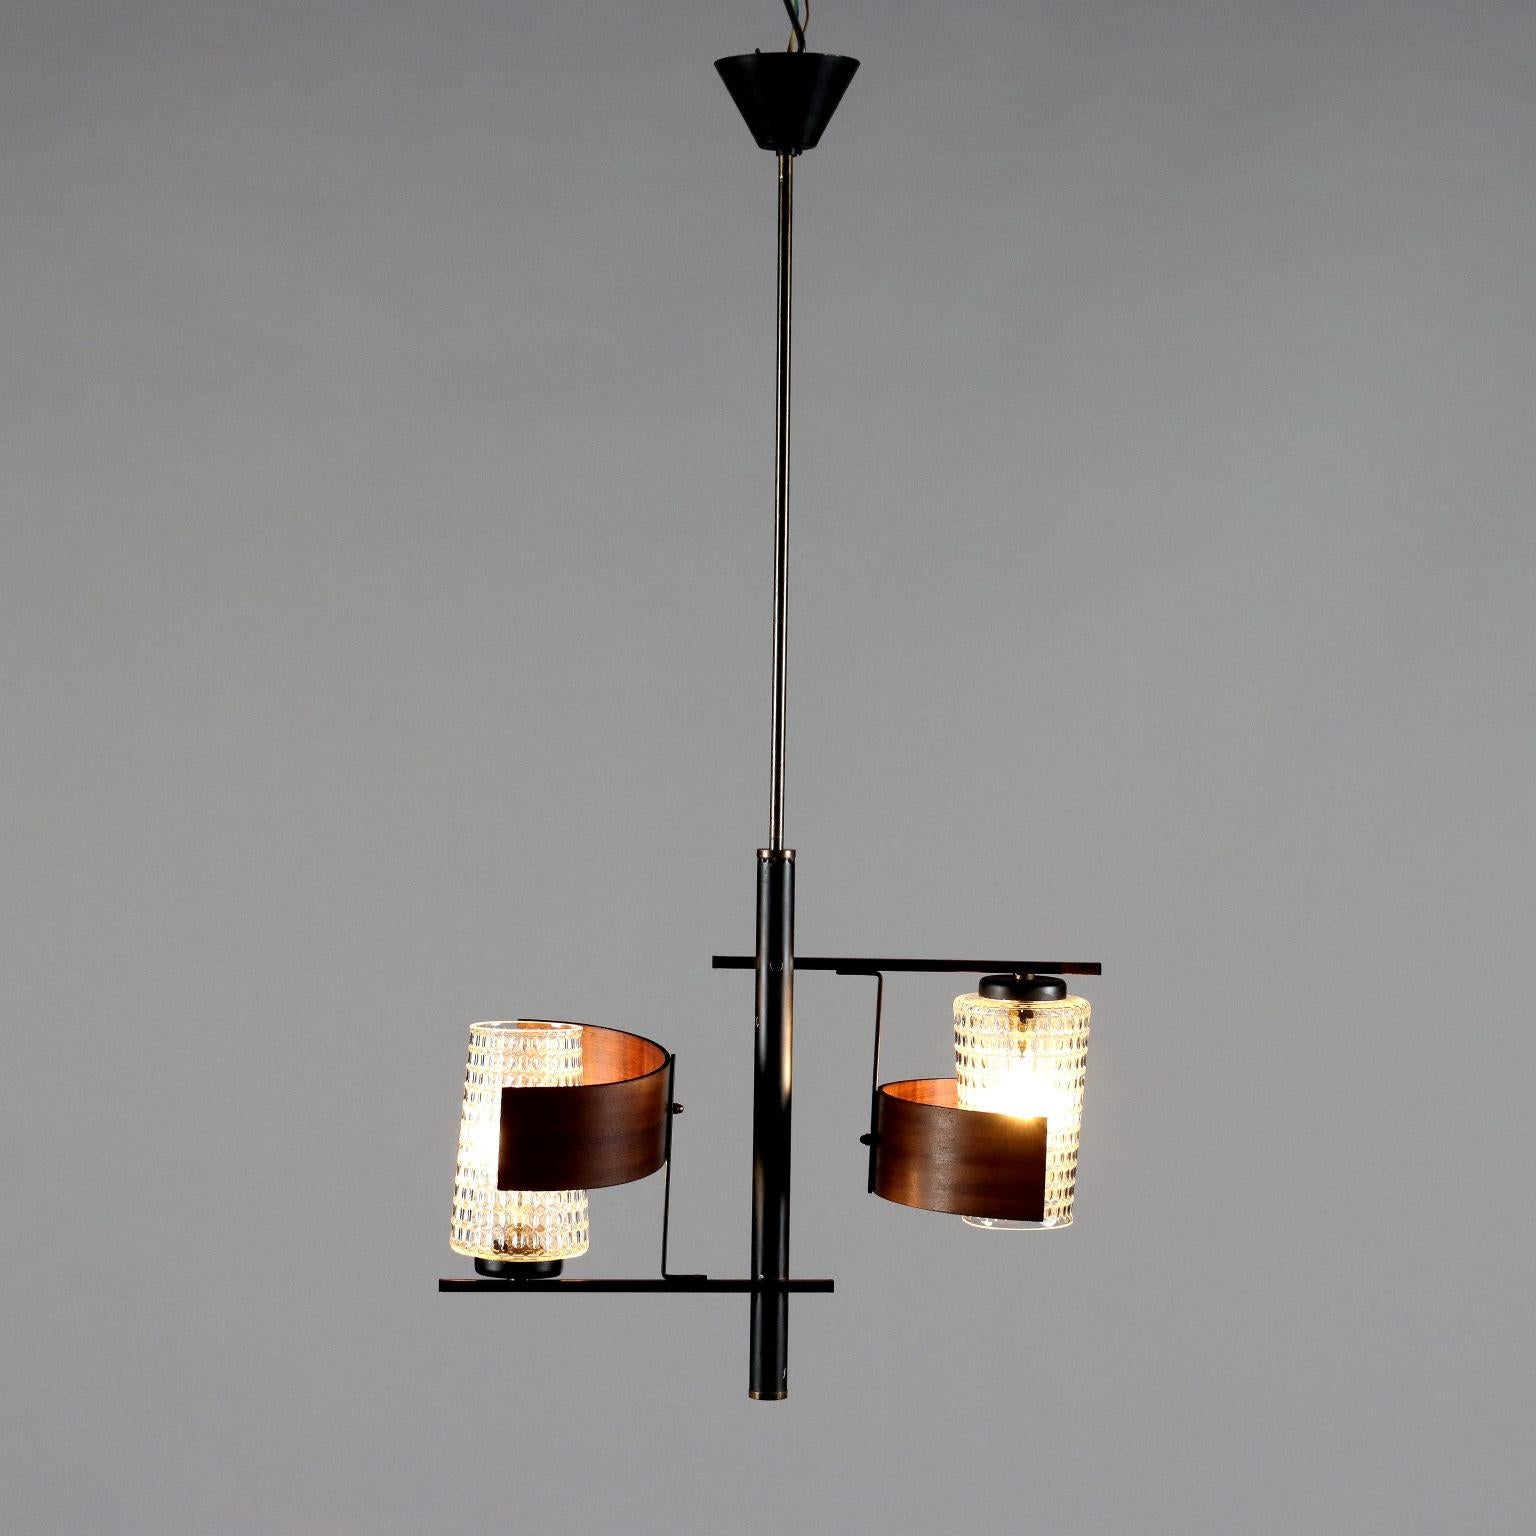 Ceiling lamp made of enameled aluminum, brass, curved teak wood and glass diffusers. 